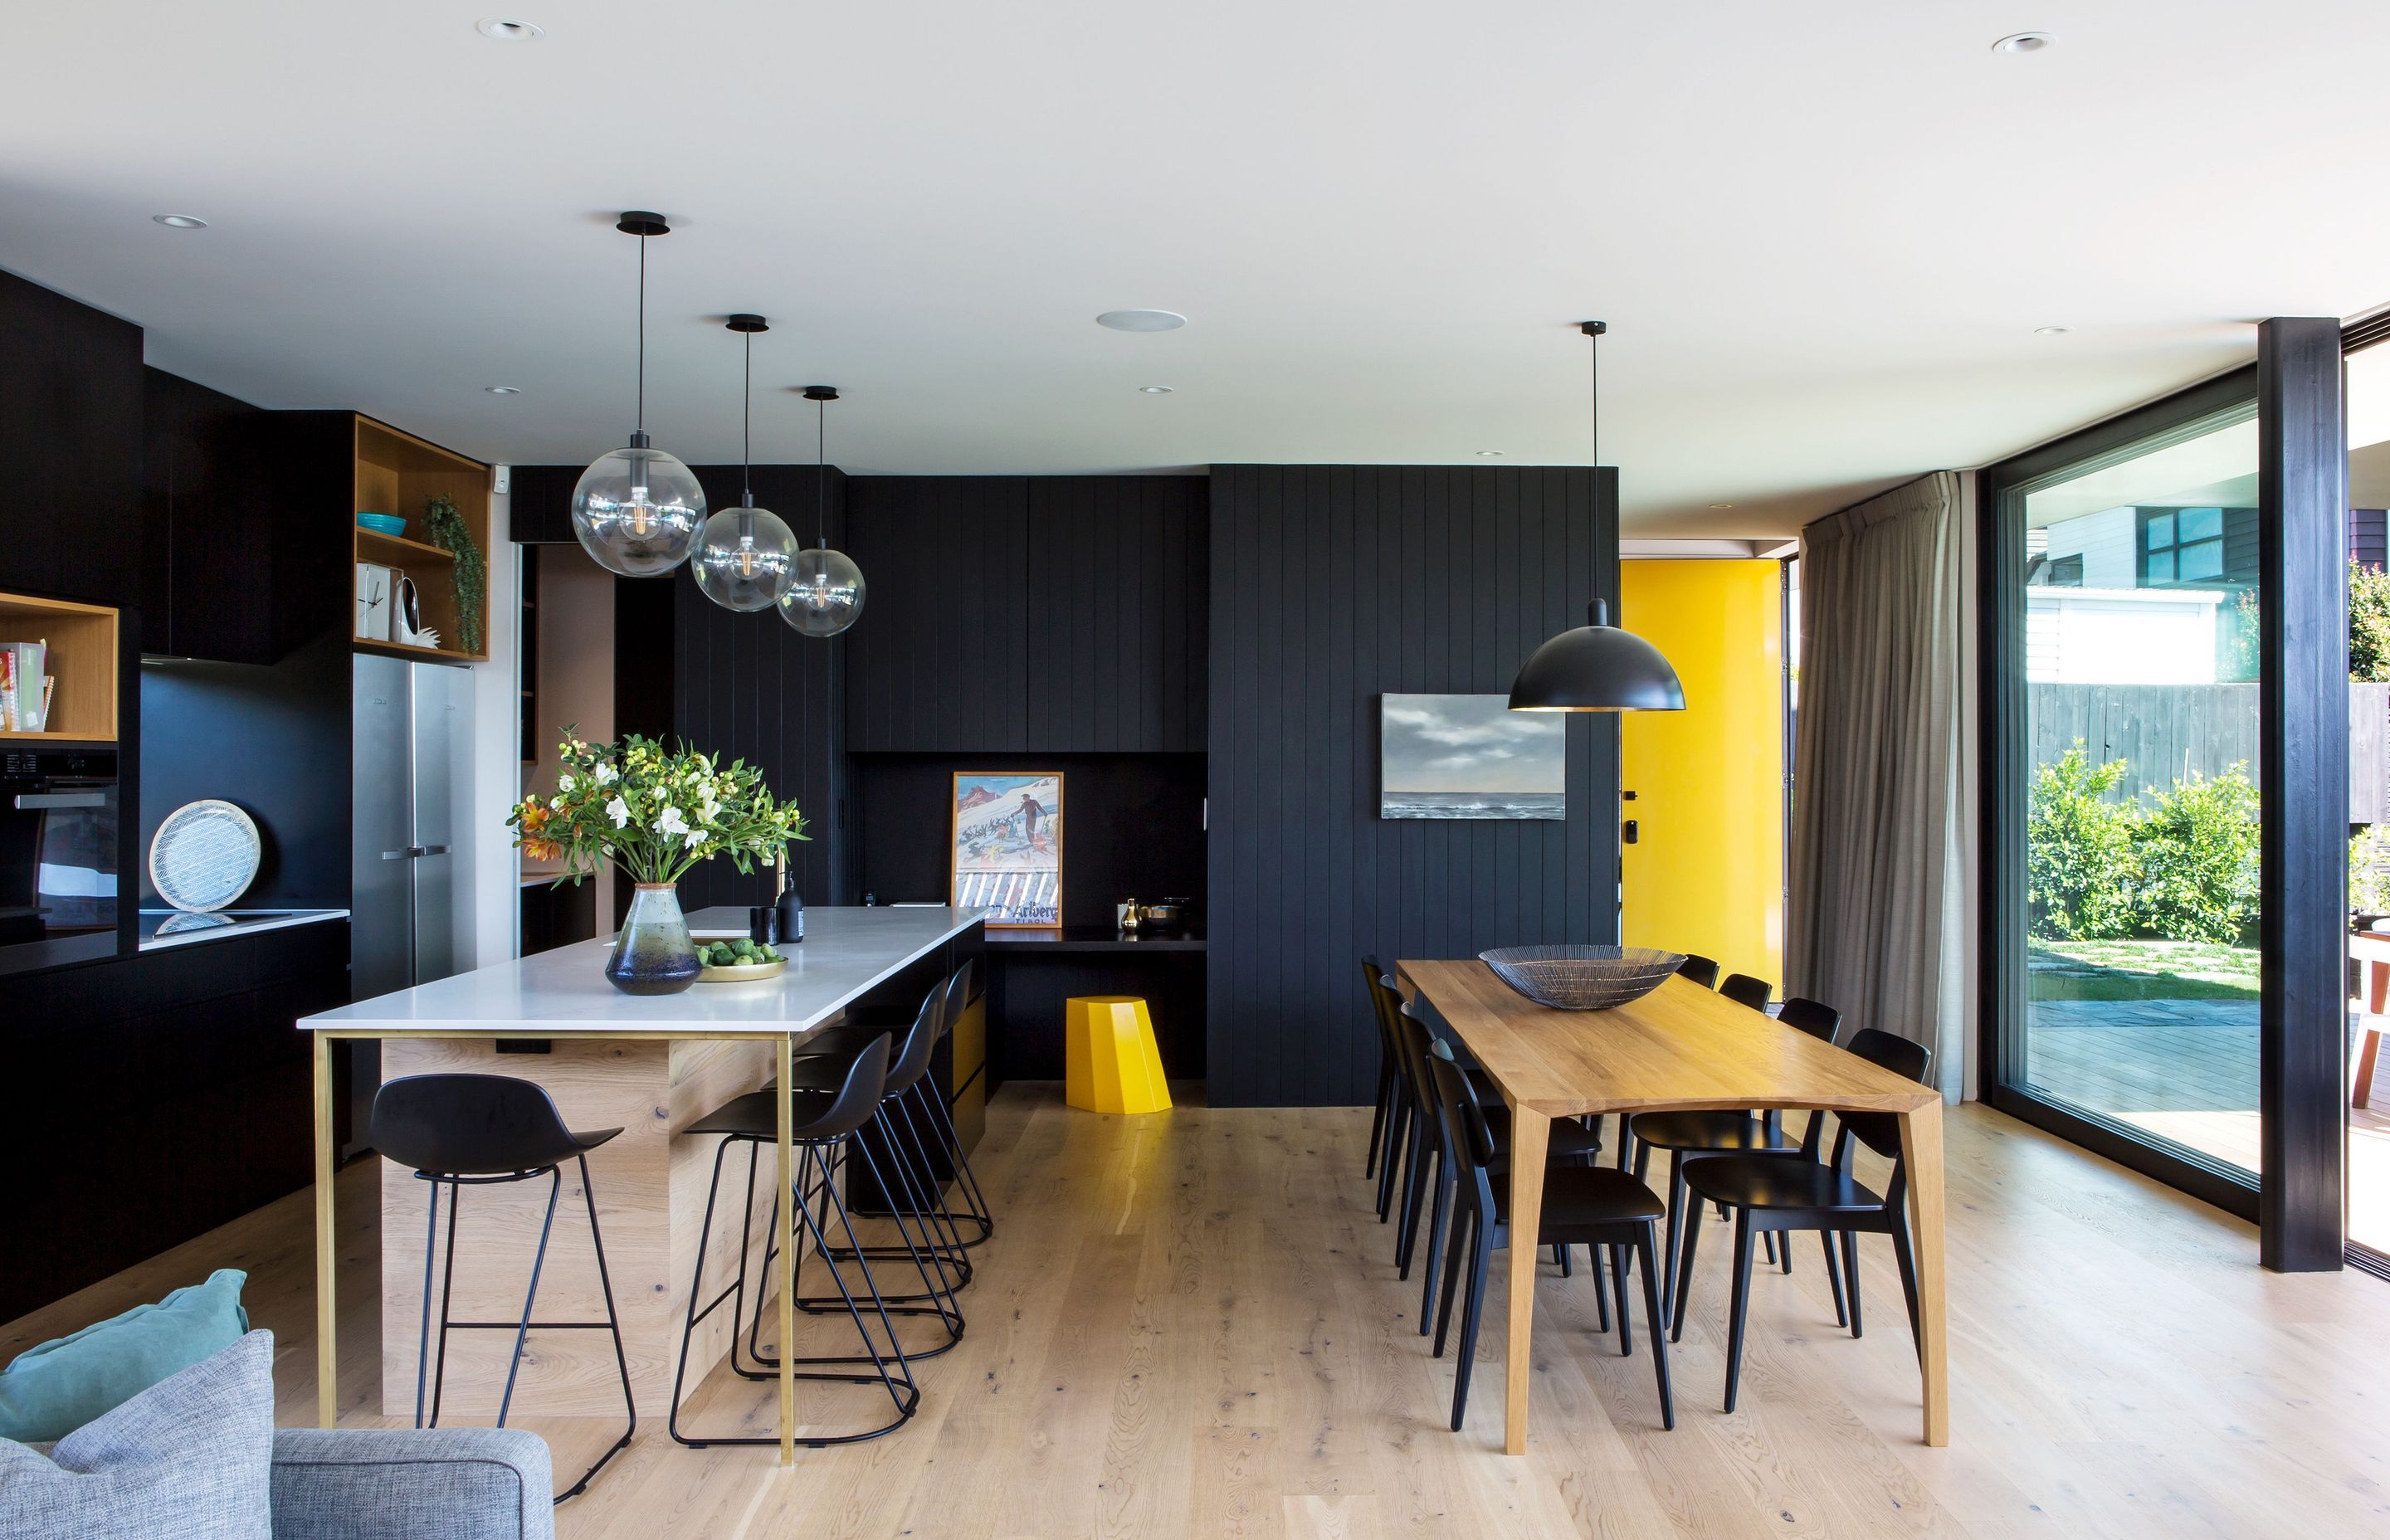 In the kitchen, splashes of yellow in the door and a stool provide colourful accents to the neutral colour scheme of black. white and honey-coloured timber.